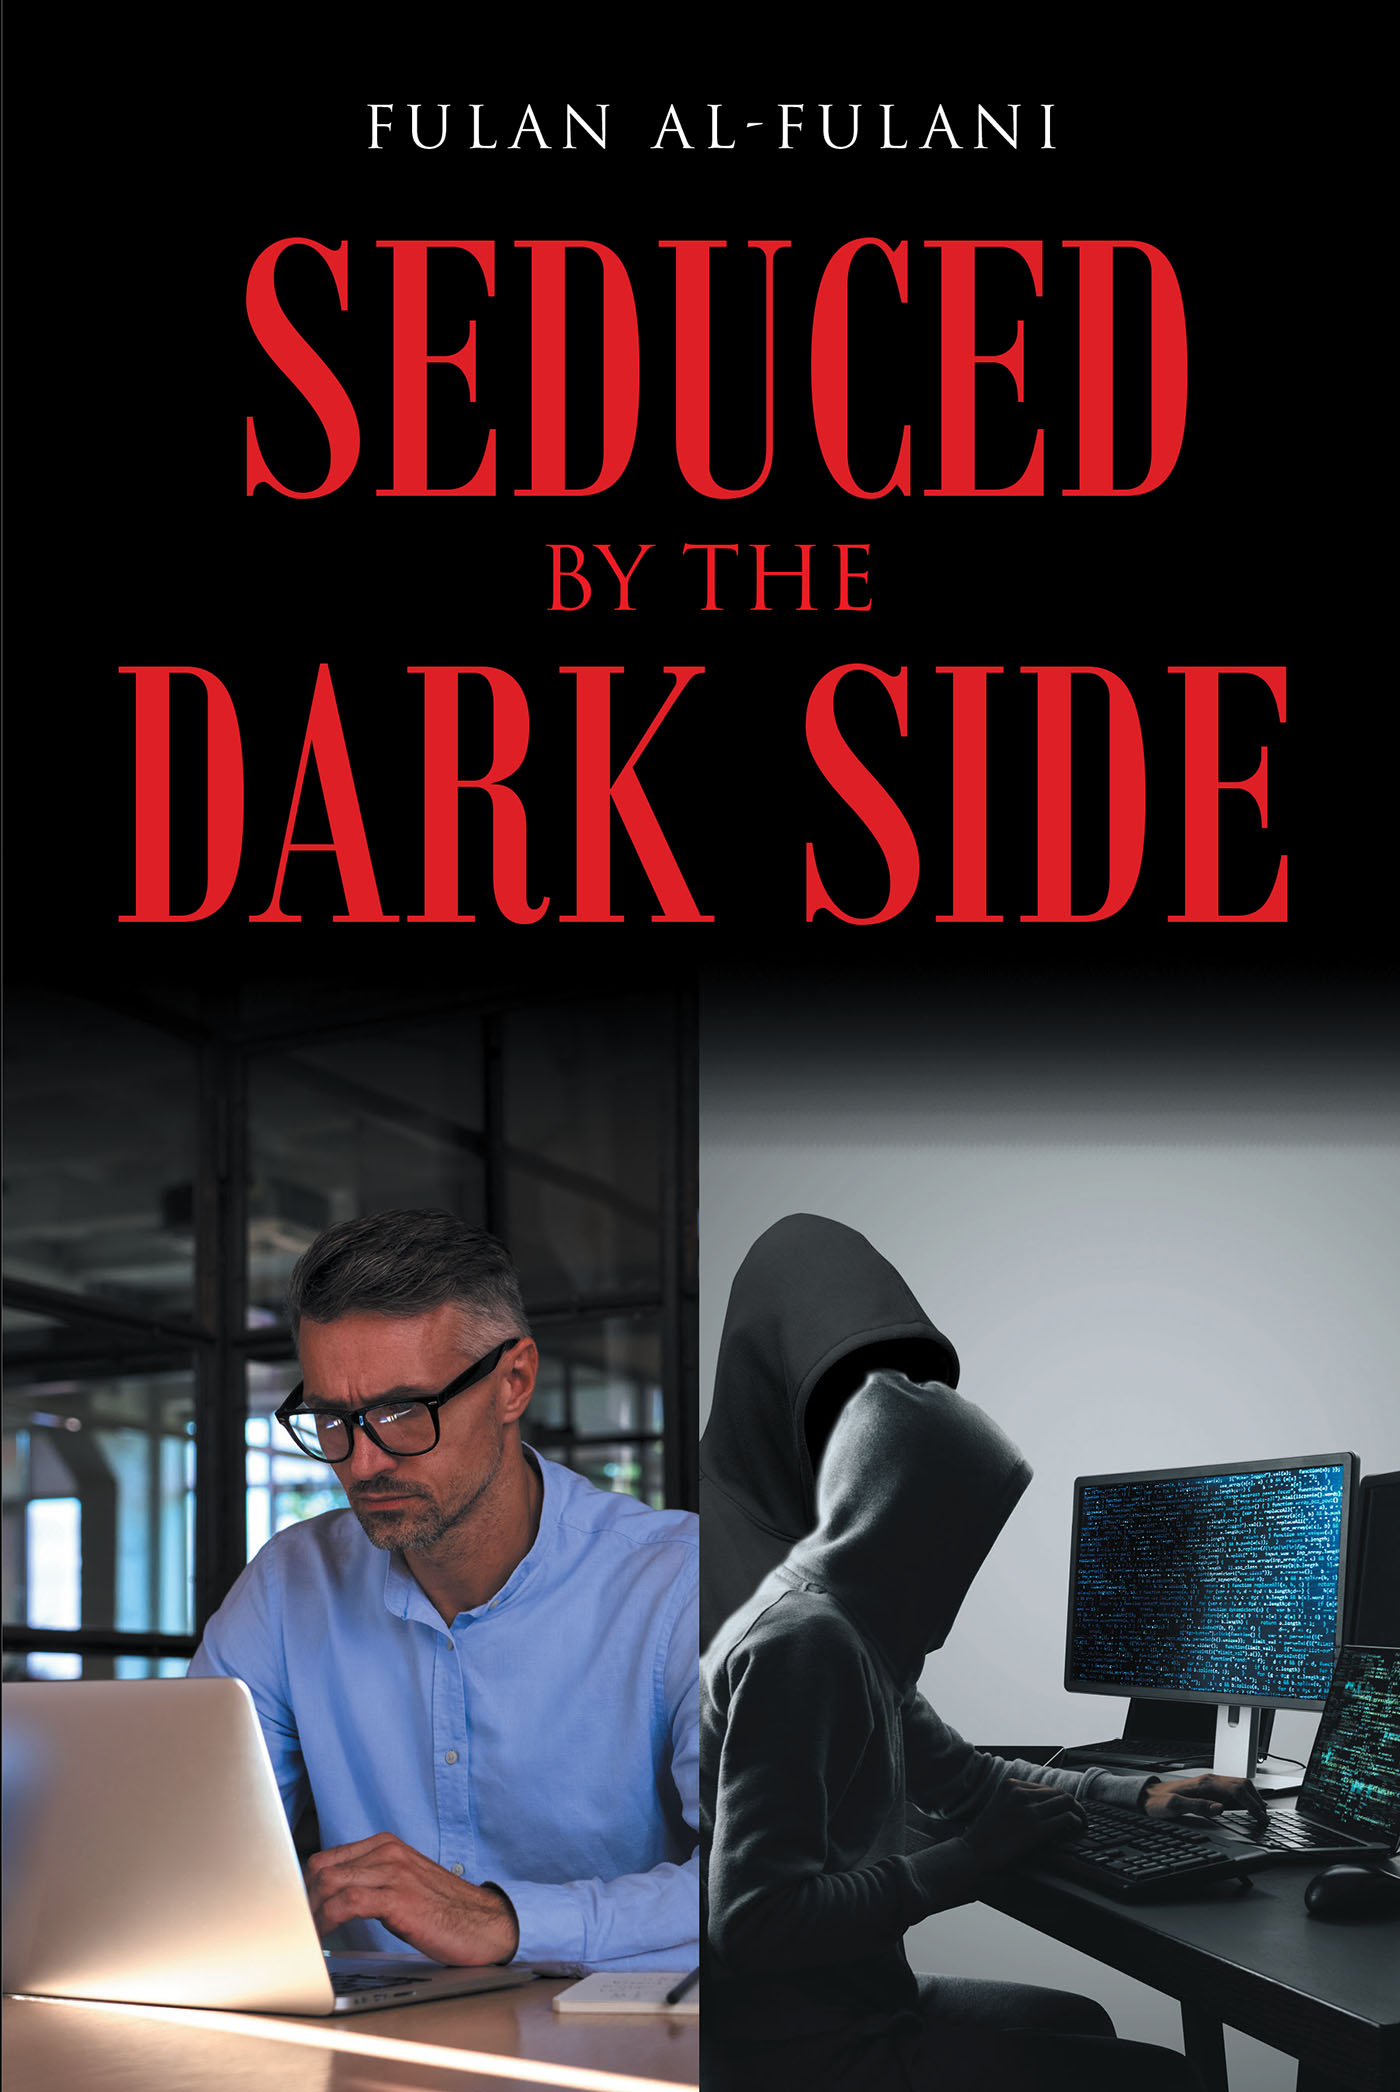 Author Fulan Al-Fulani’s New Book, "Seduced by the Dark Side," Details the Author’s Disastrous Cyberspace Adventure, Discovering the Dark Side of Online Dating